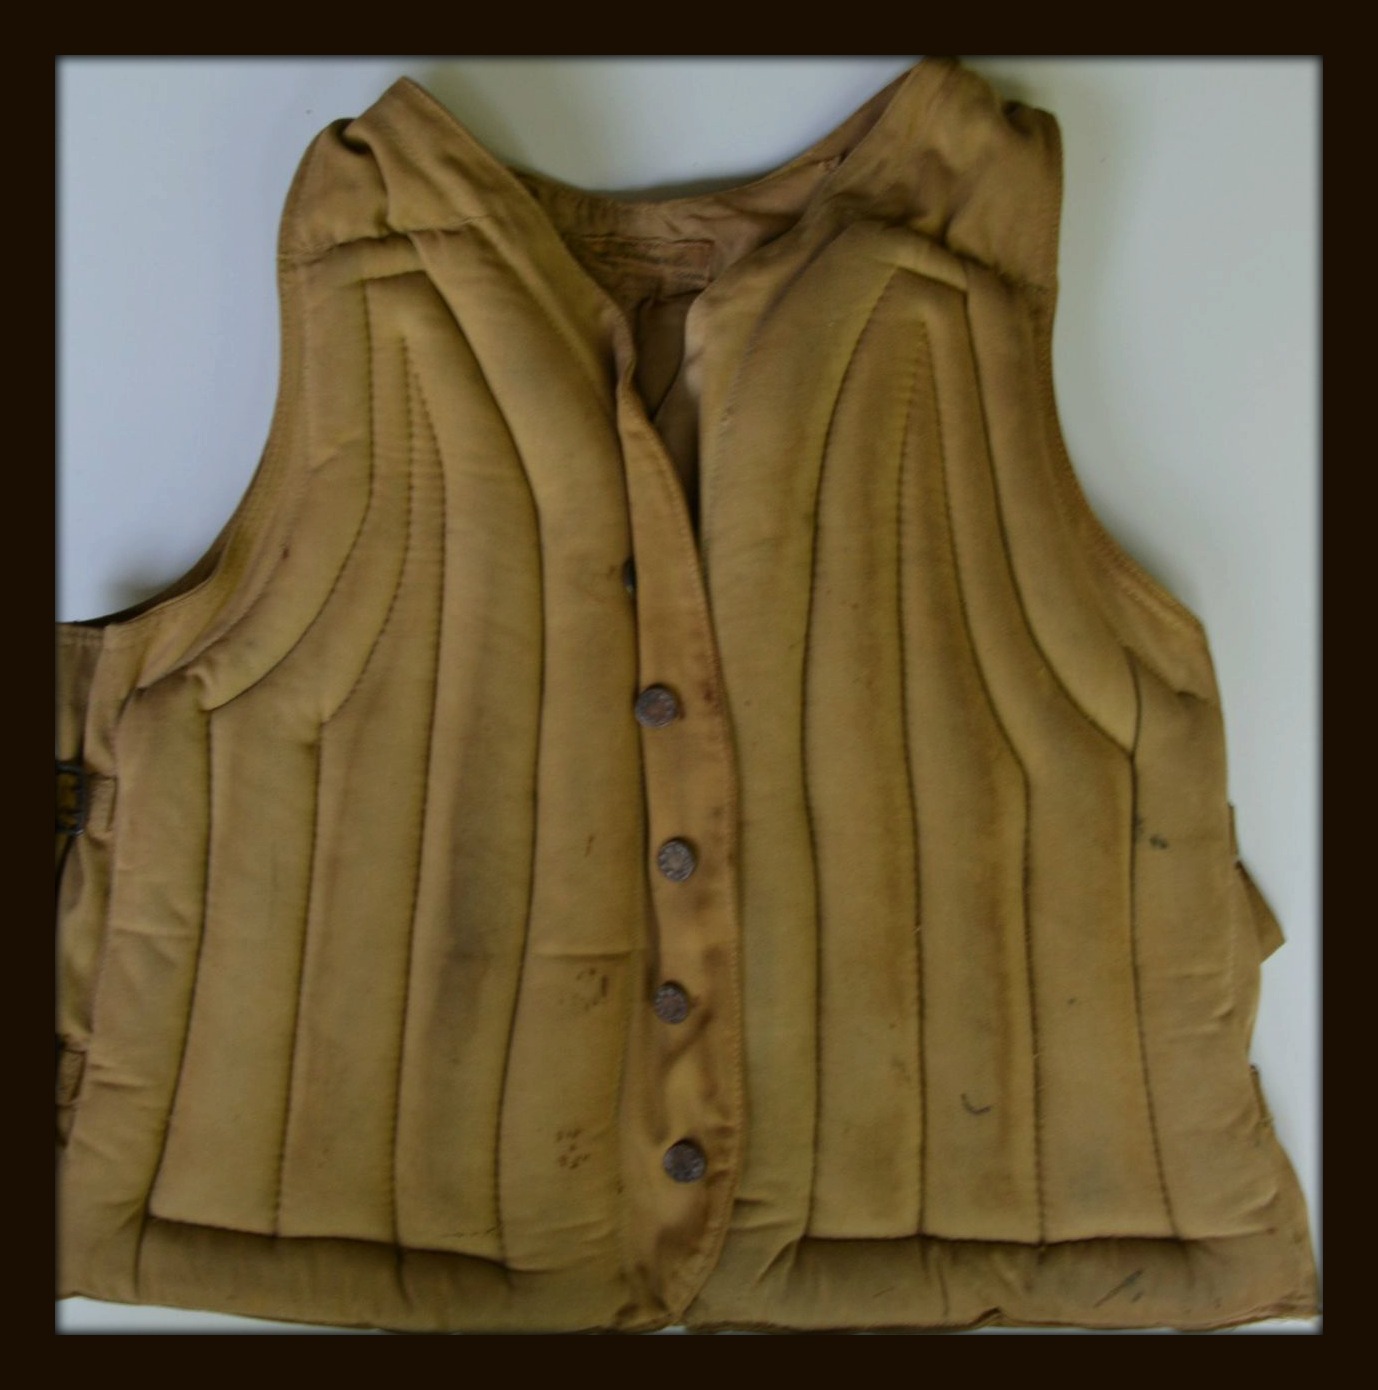 Life Vest with Metal Buttons